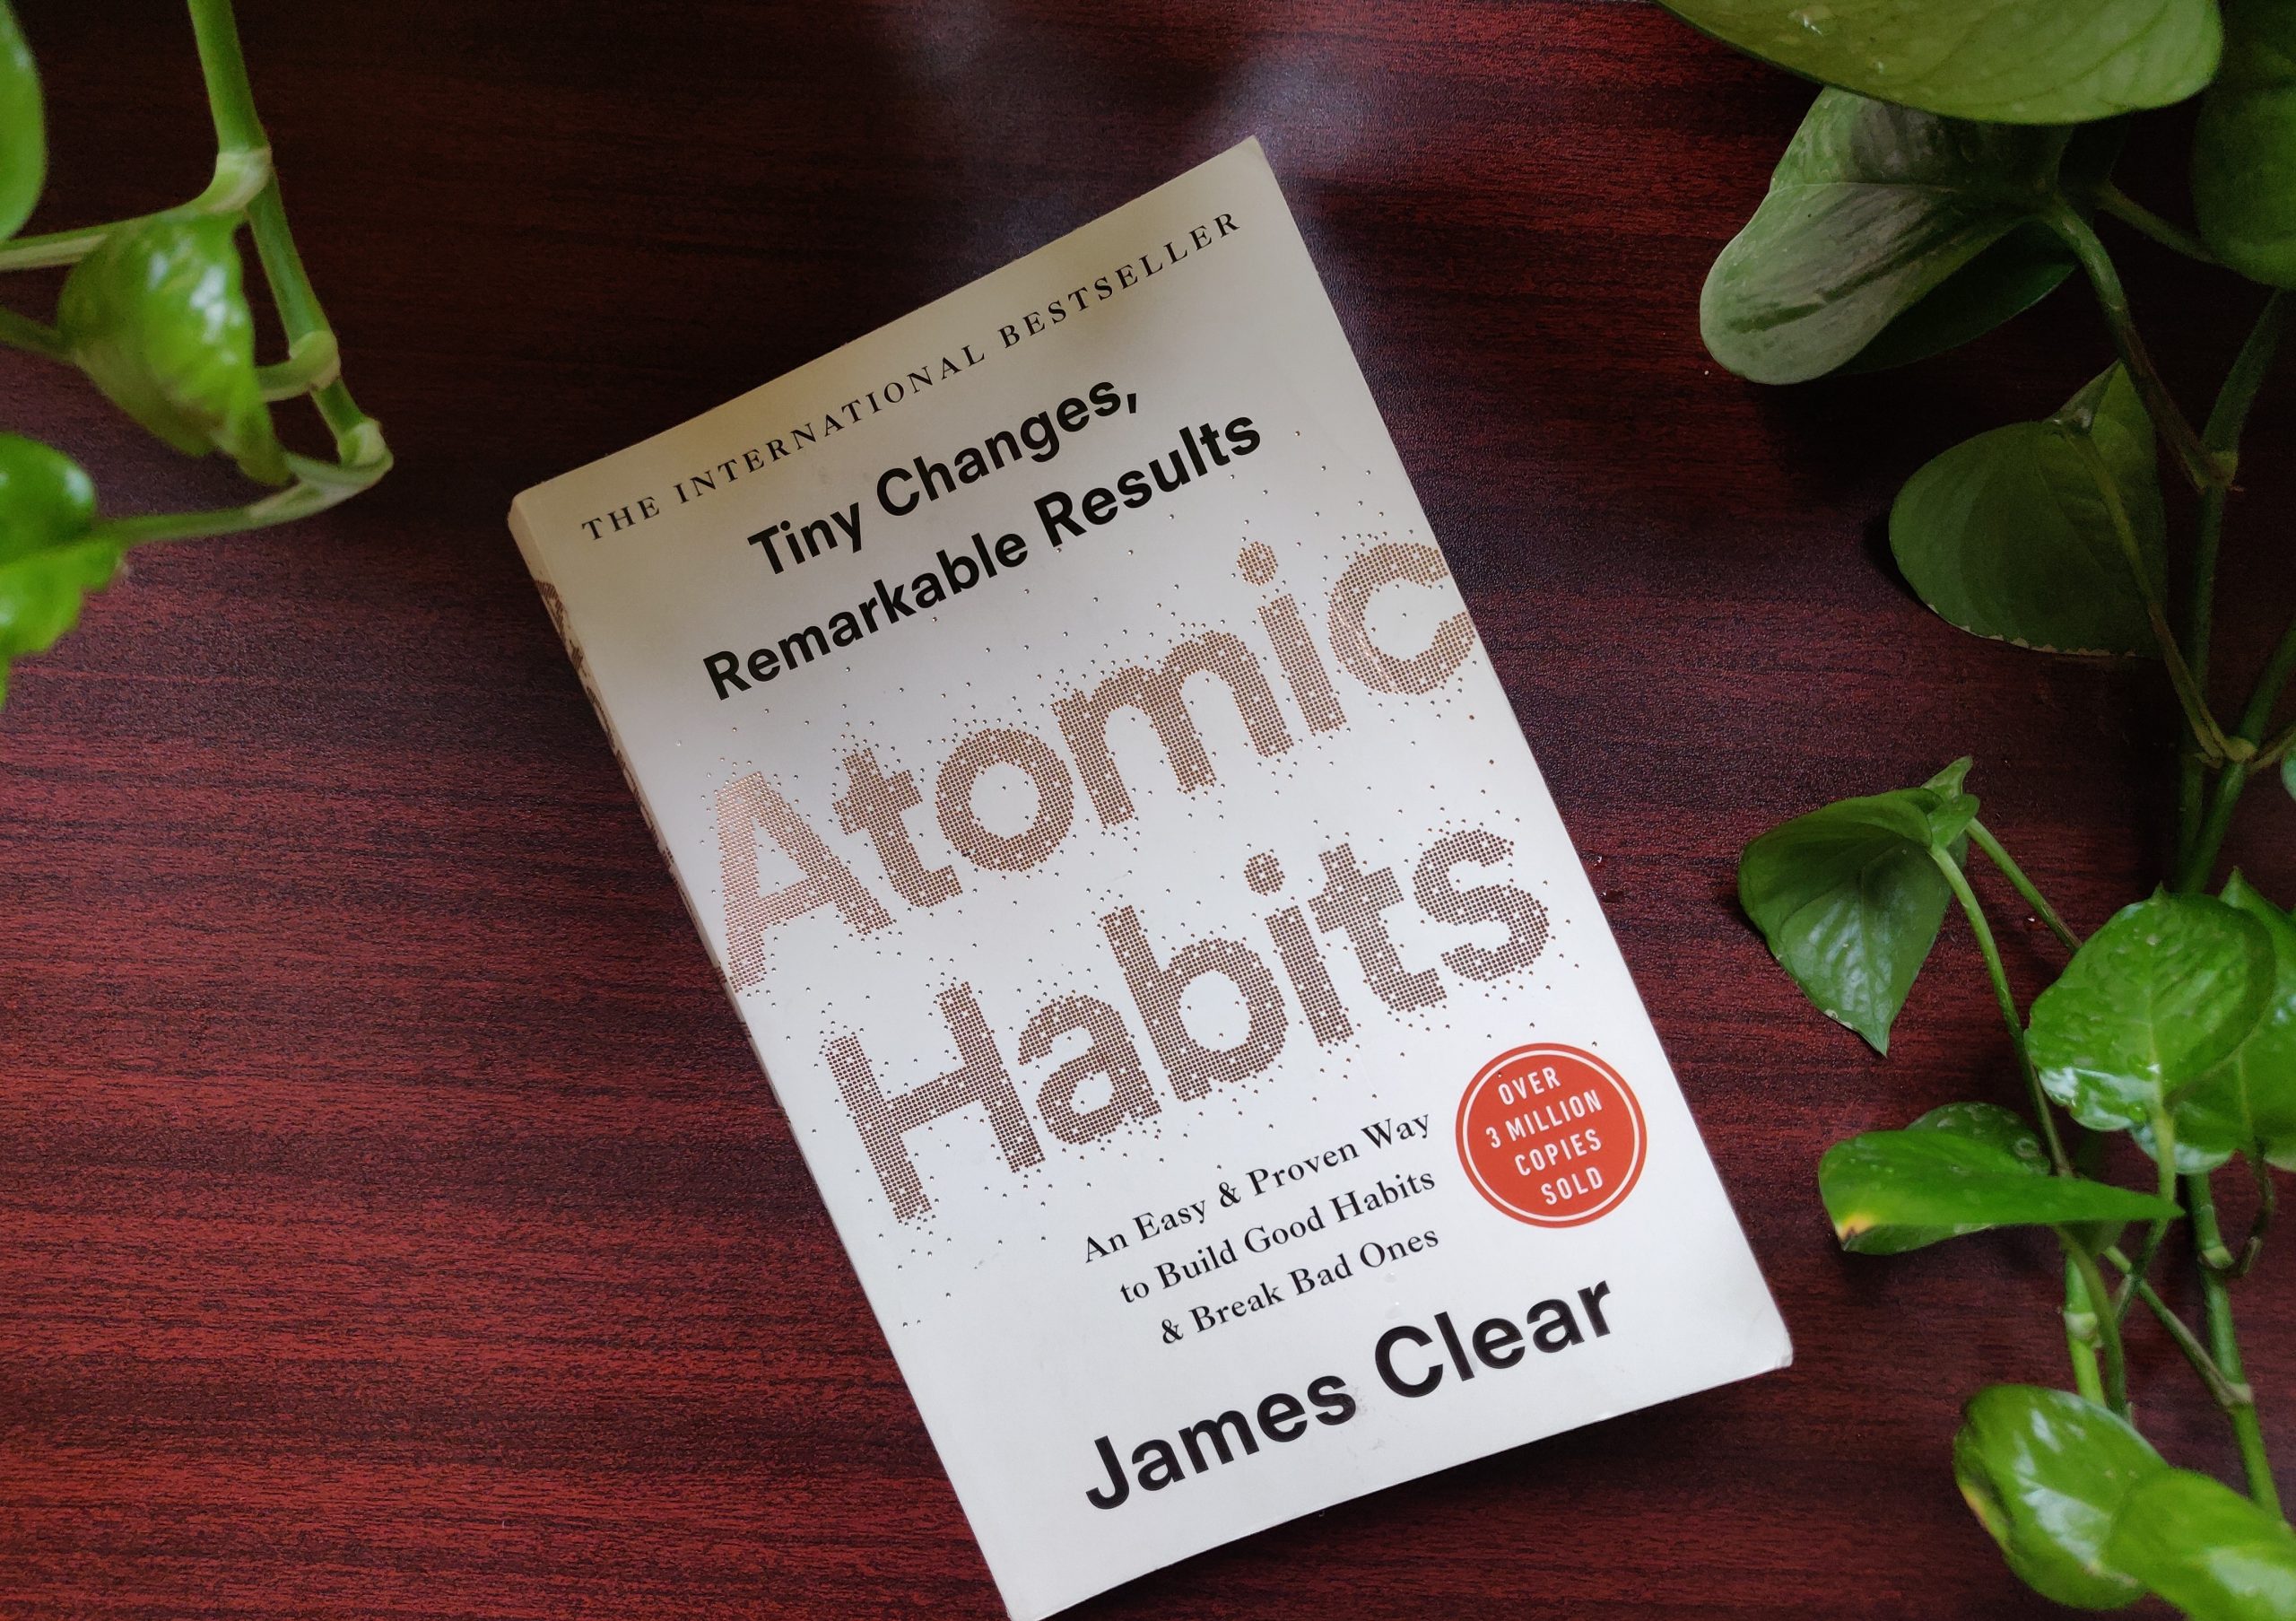 atomic habits book review new york times